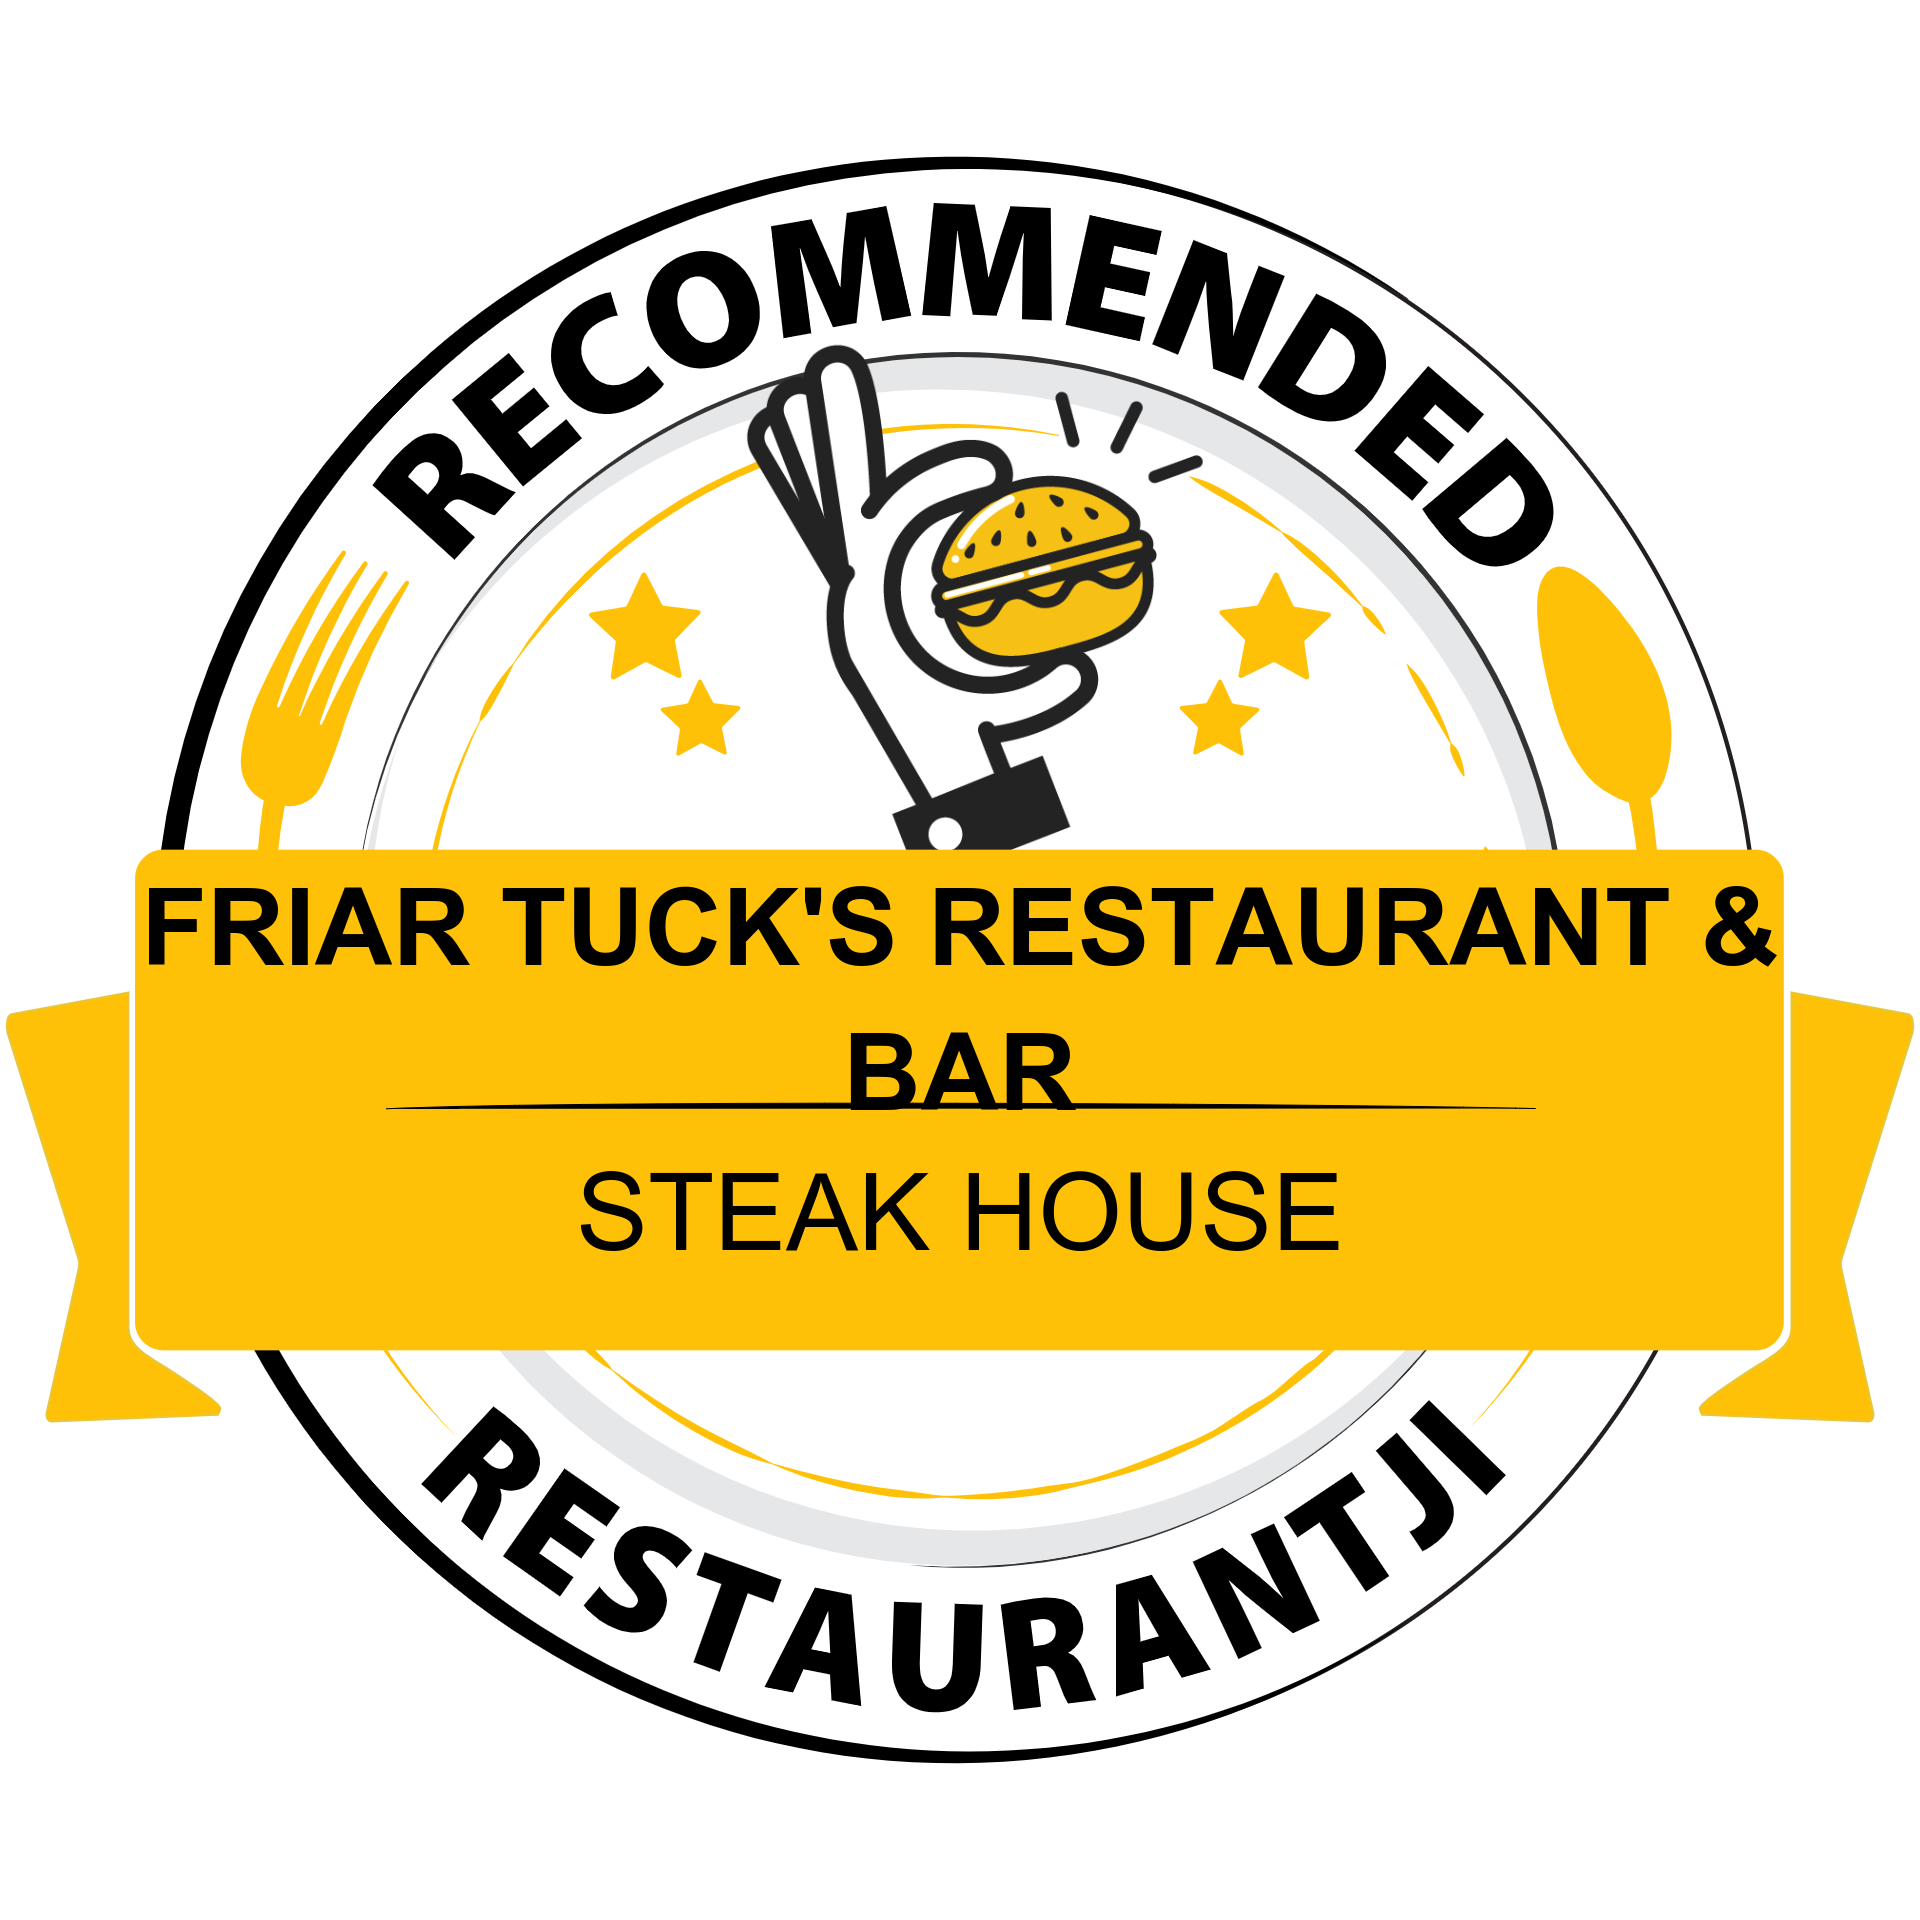 Friar Tuck's Restaurant & Bar is a must-visit according to Restaurantji - your go-to source for the best local restaurants.